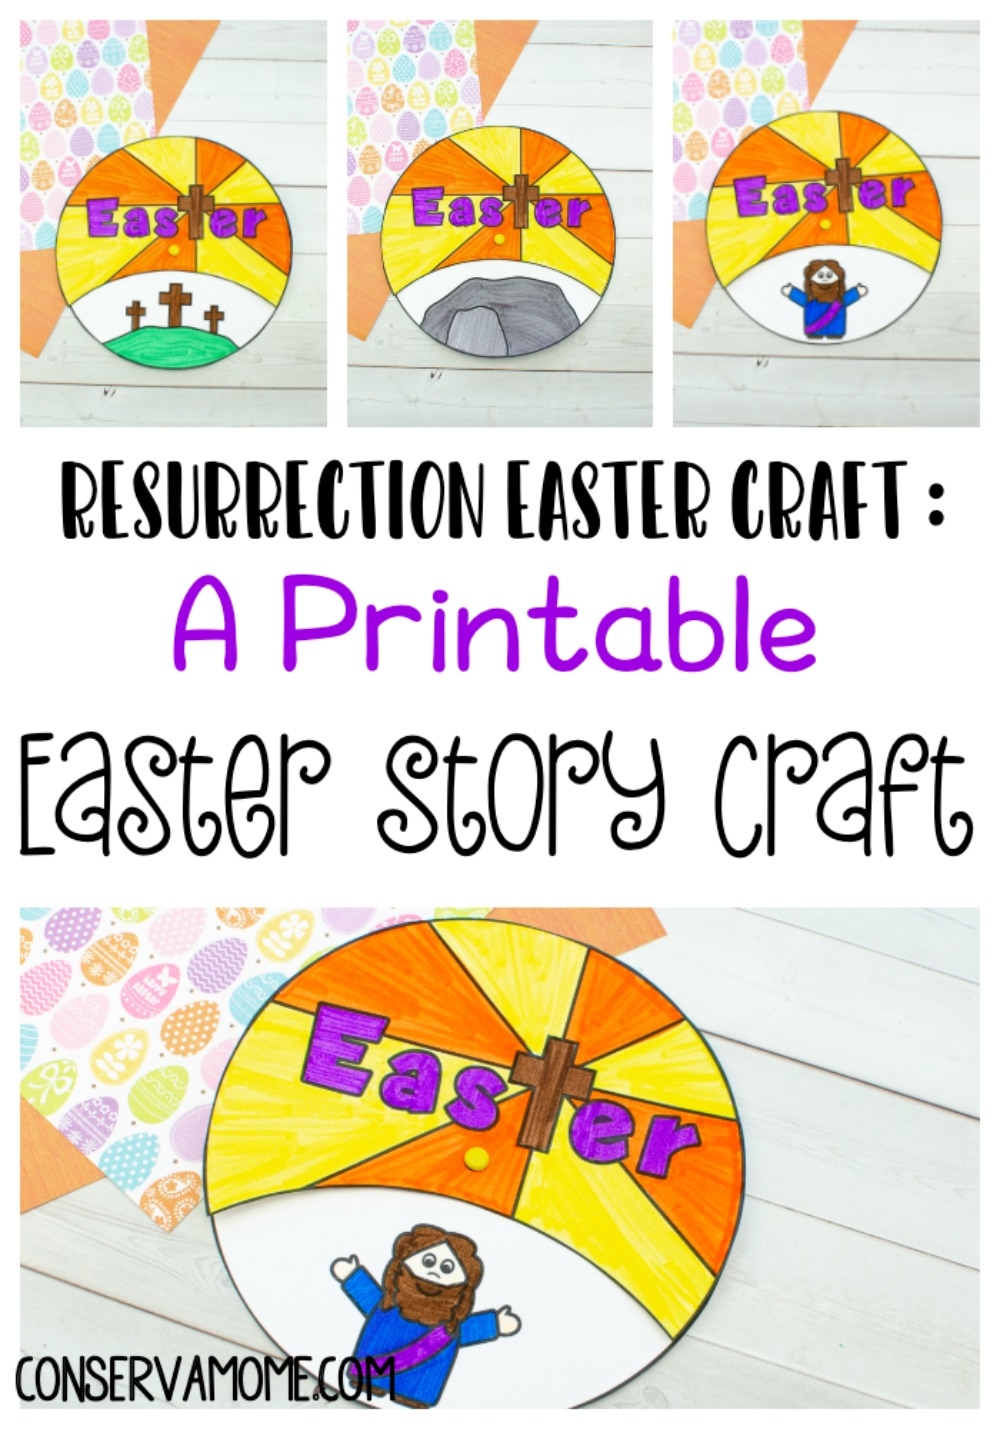 Resurrection Easter Craft A Printable Easter Story Craft